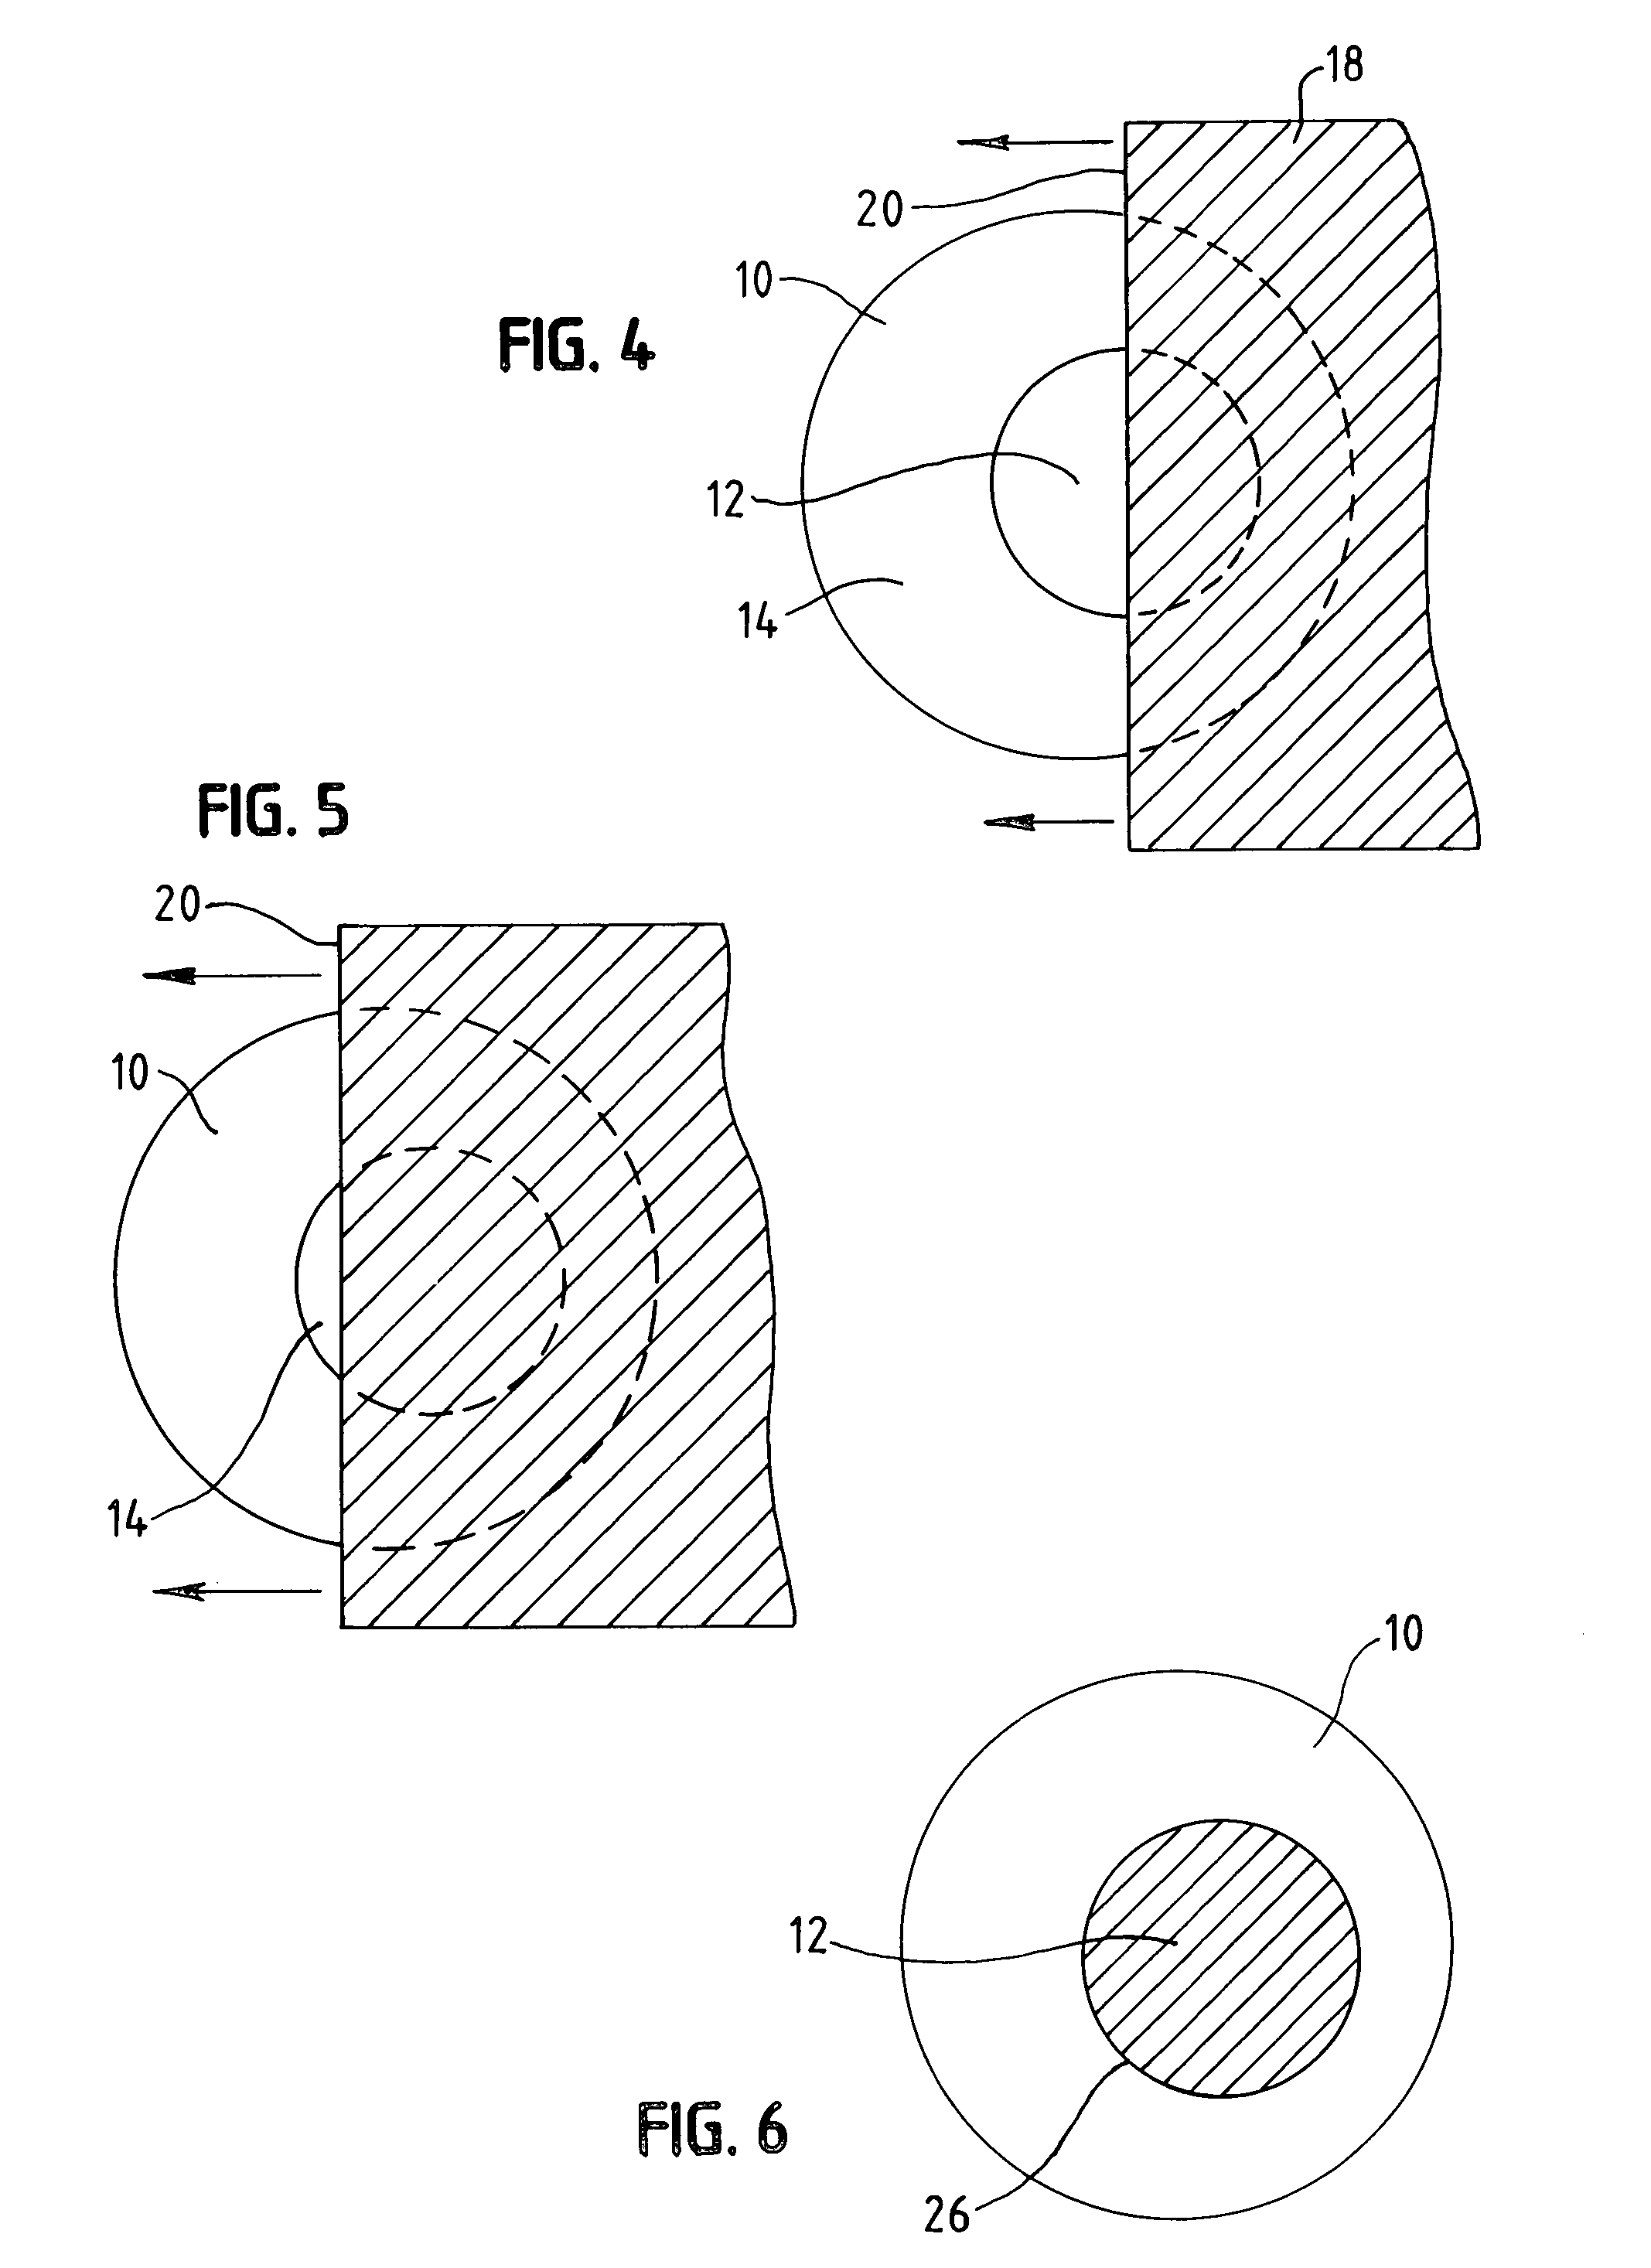 Method and apparatus for correcting off-center laser ablations in refractive surgery